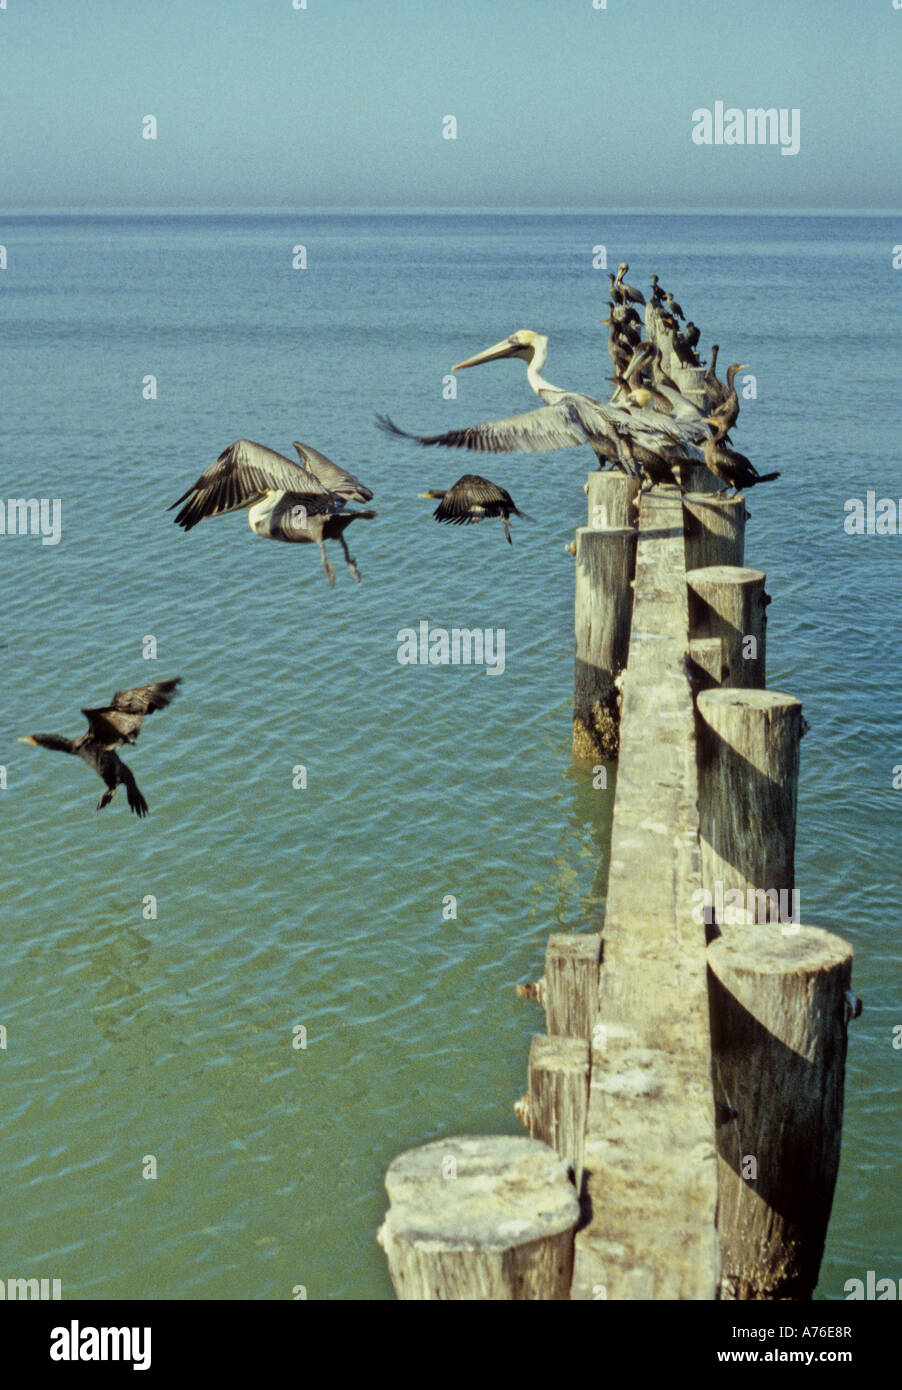 Water Birds taking flight from a jetty in Naples, Florida Stock Photo